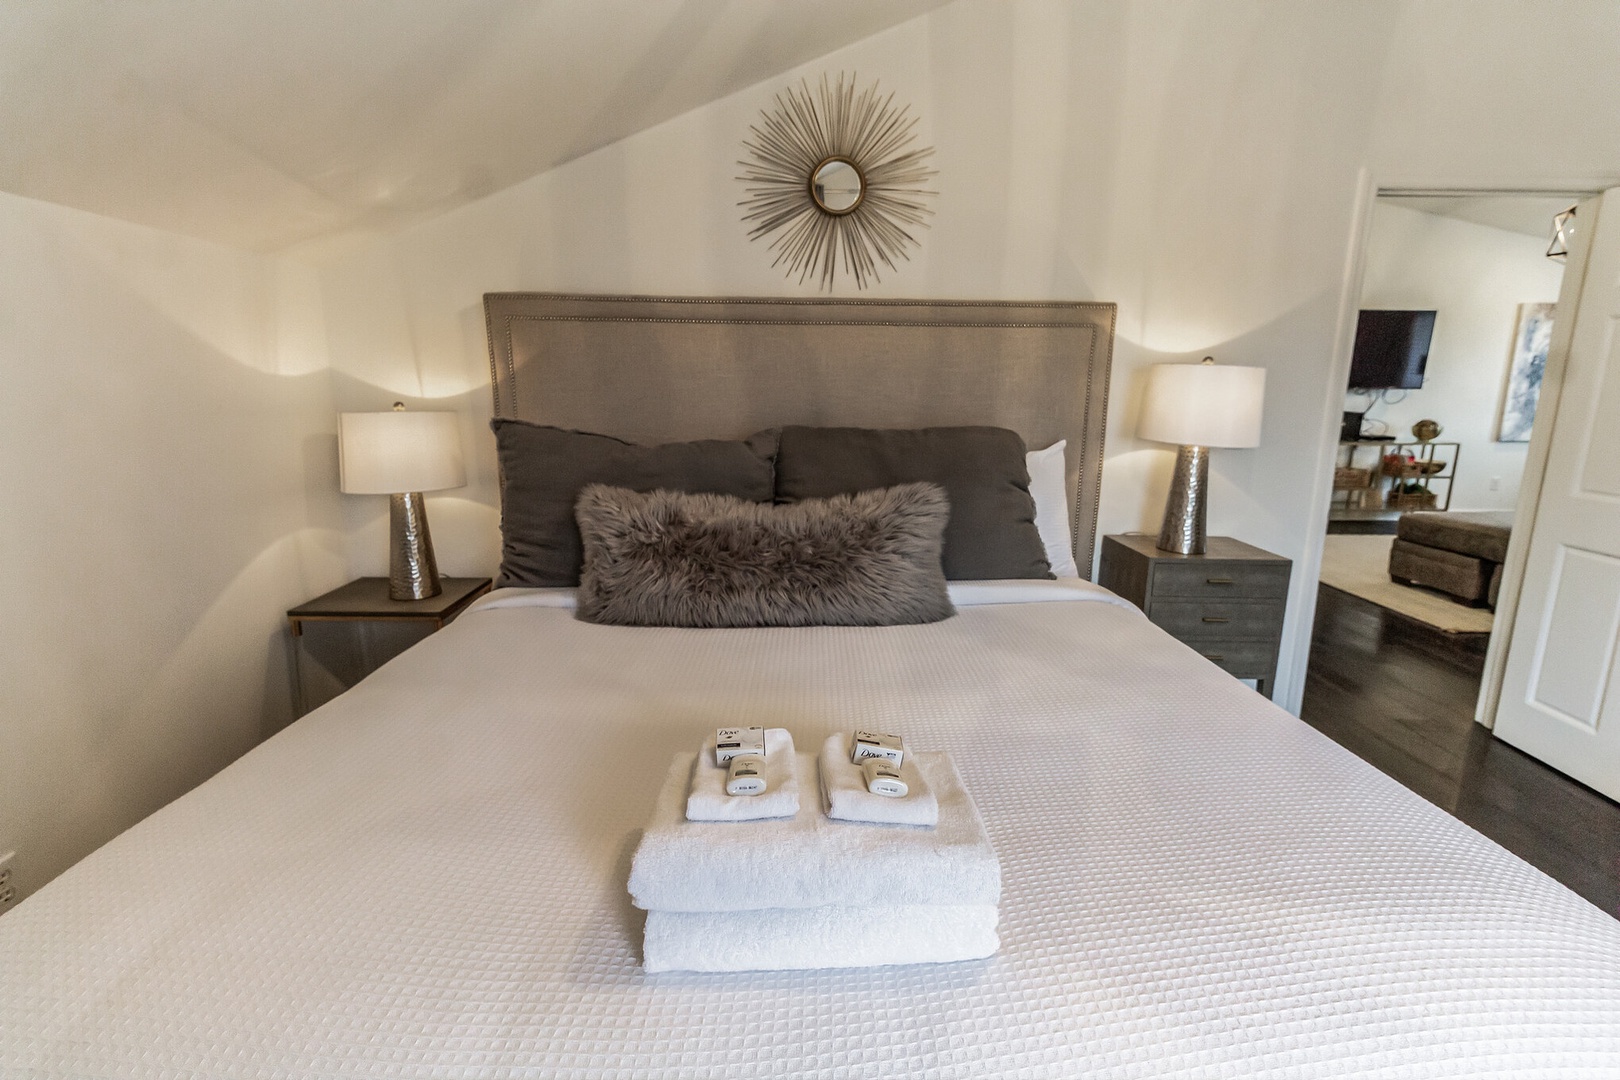 Unit C2: The elegant private bedroom offers a king bed & Smart TV